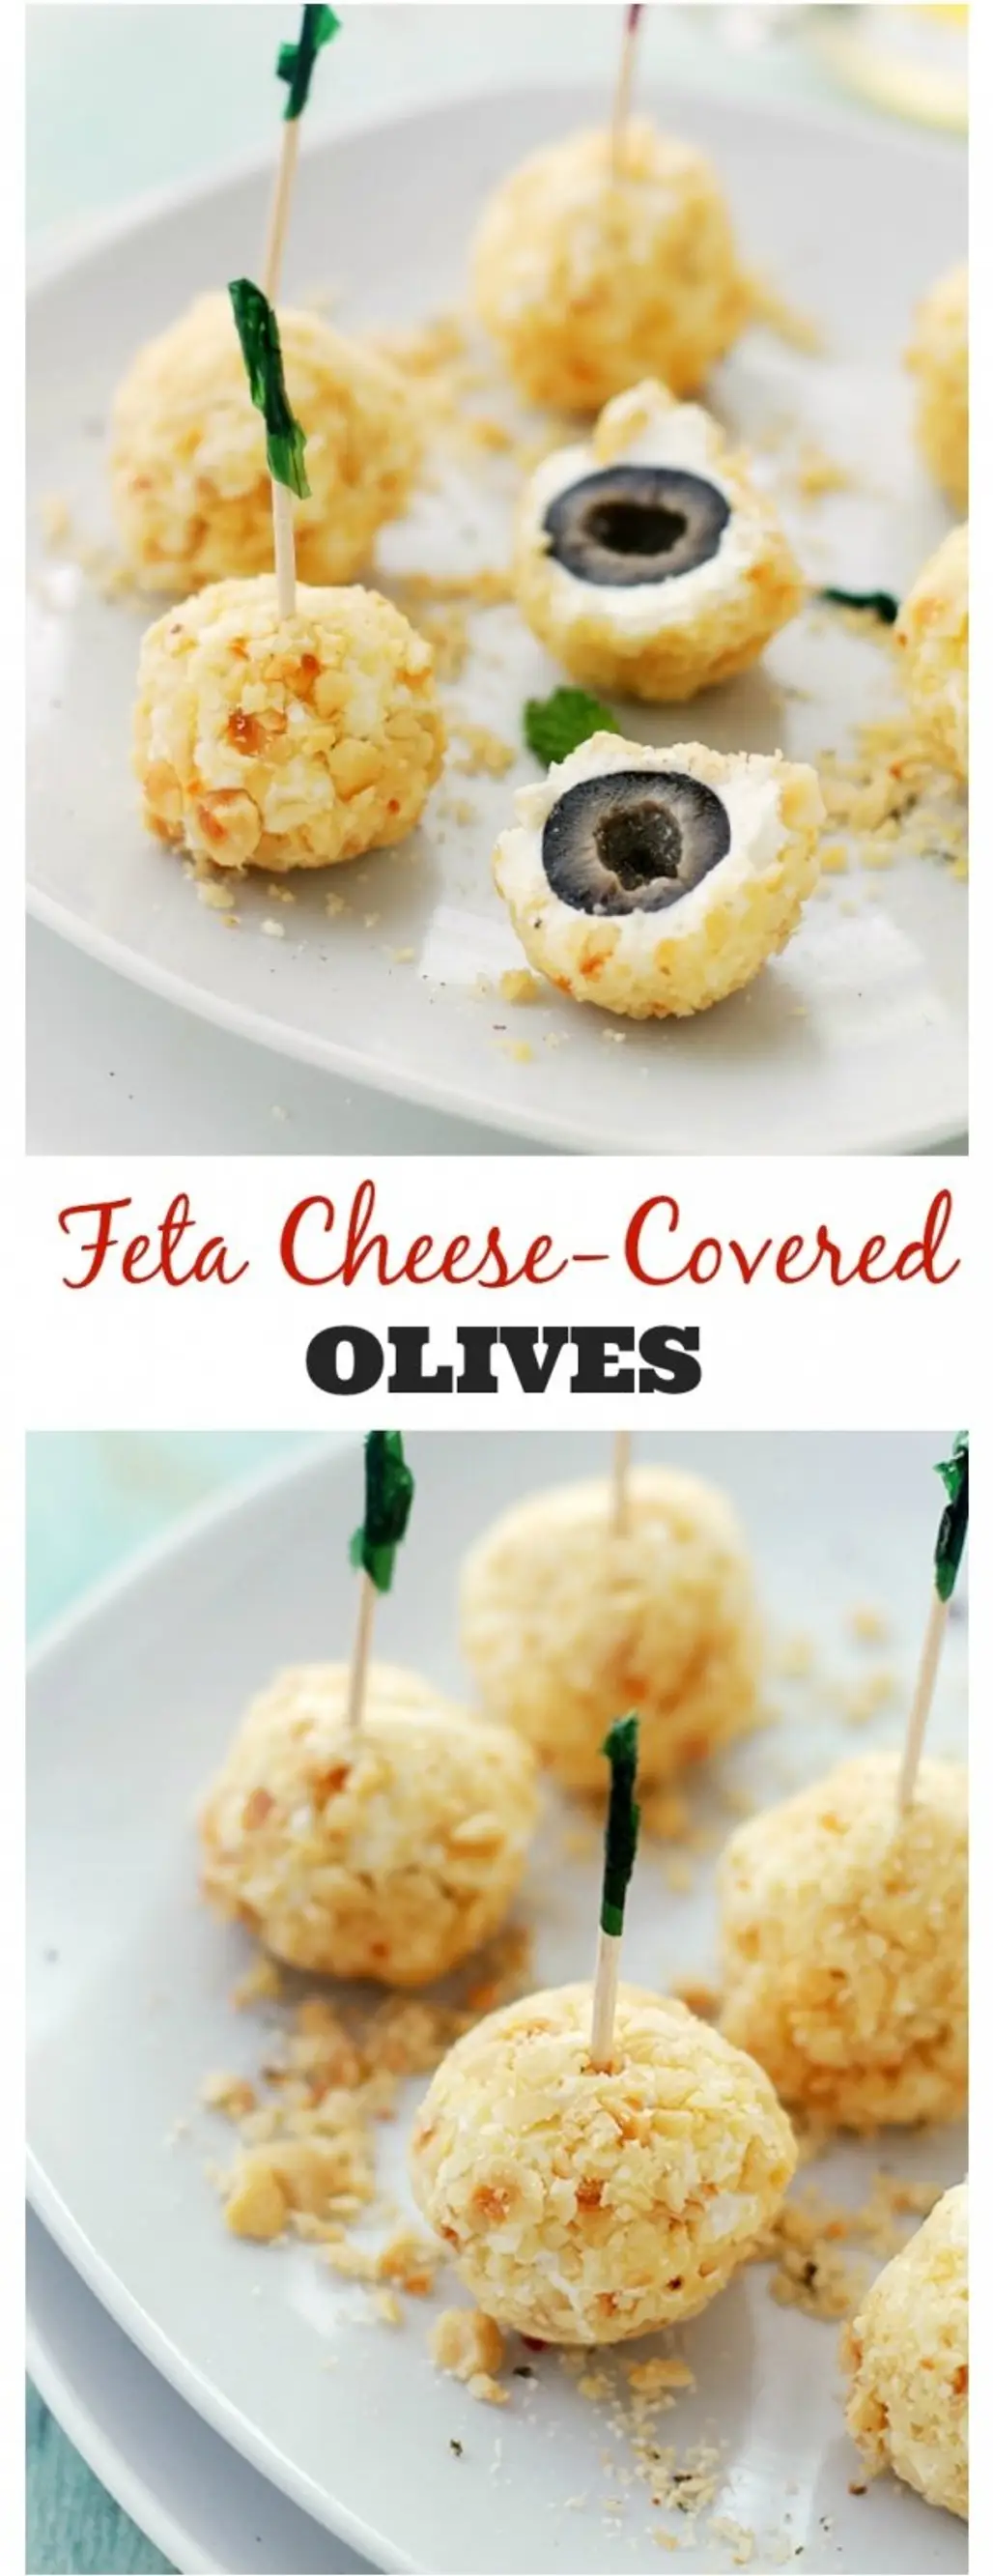 Feta Cheese Covered Olives